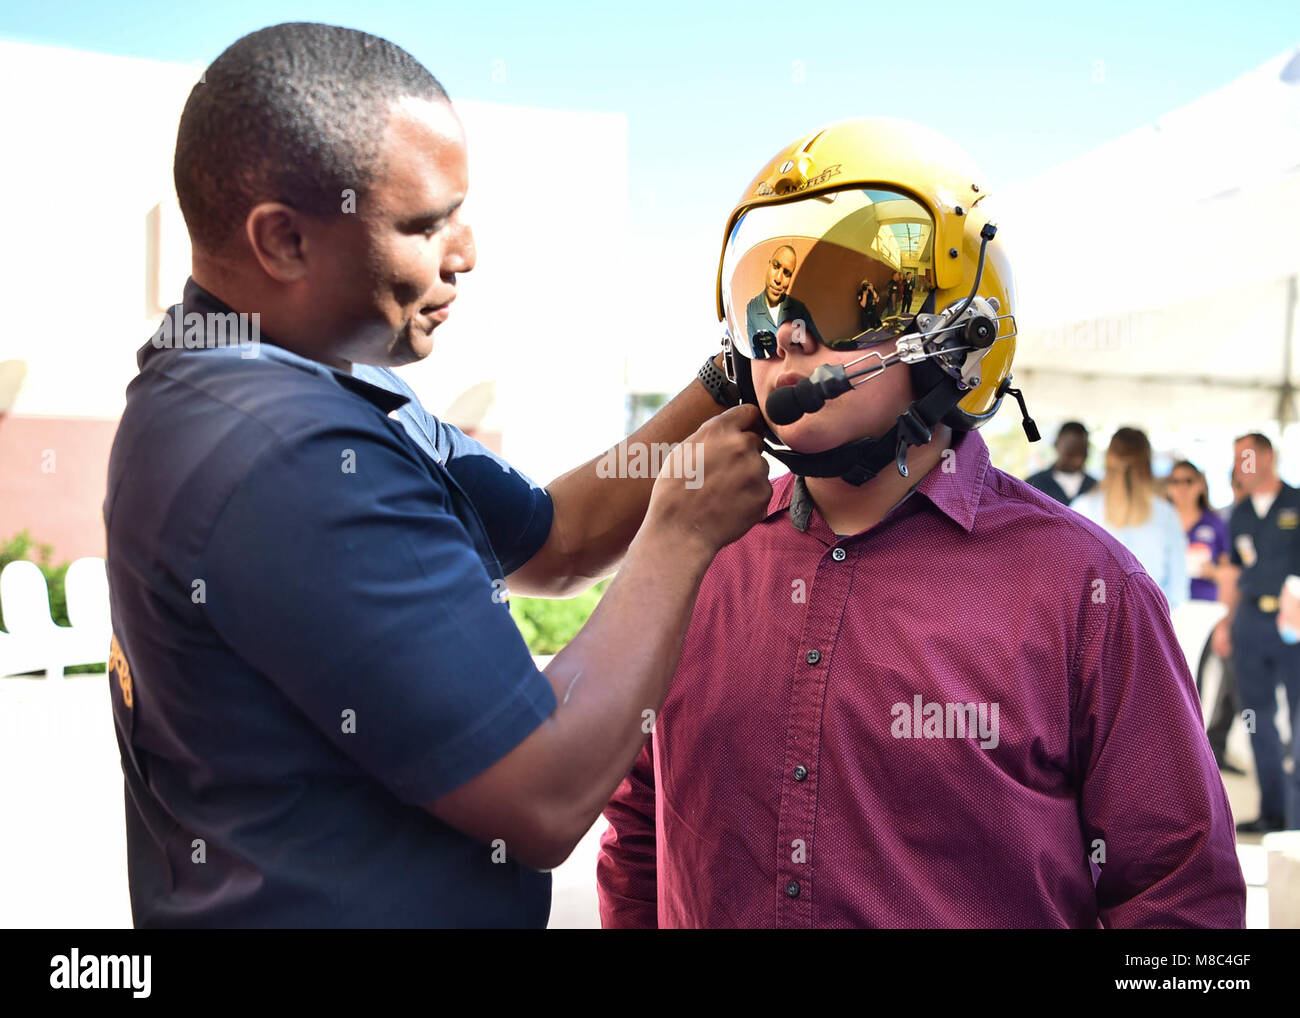 CENTRO, Calif. (Feb. 25, 2018) Aviation Ordnanceman, Roderick Stevenson, shows a young fan a pilot's helmet at El Centro Regional Medical Hospital during a meet and greet event. The Blue Angels are scheduled to perform more than 60 demonstrations at more than 30 locations across the U.S. in 2018. (U.S. Navy Stock Photo